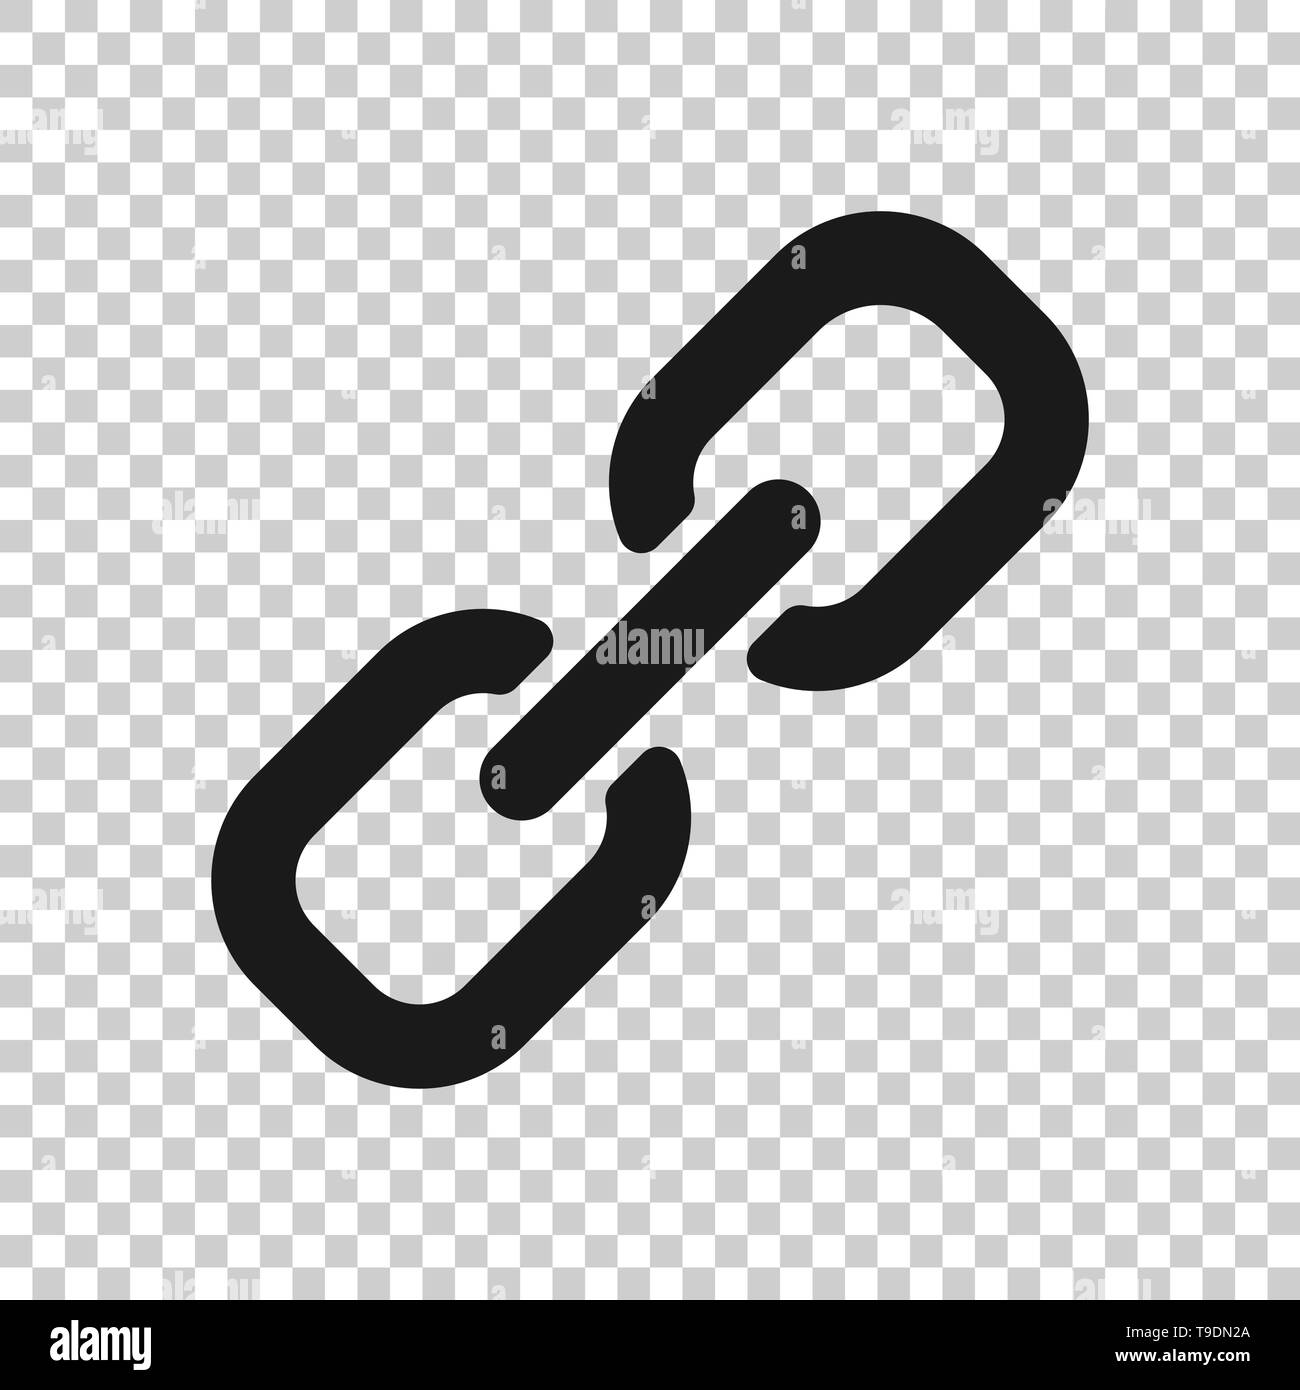 Chain sign icon in transparent style. Link vector illustration on isolated background. Hyperlink business concept. Stock Vector